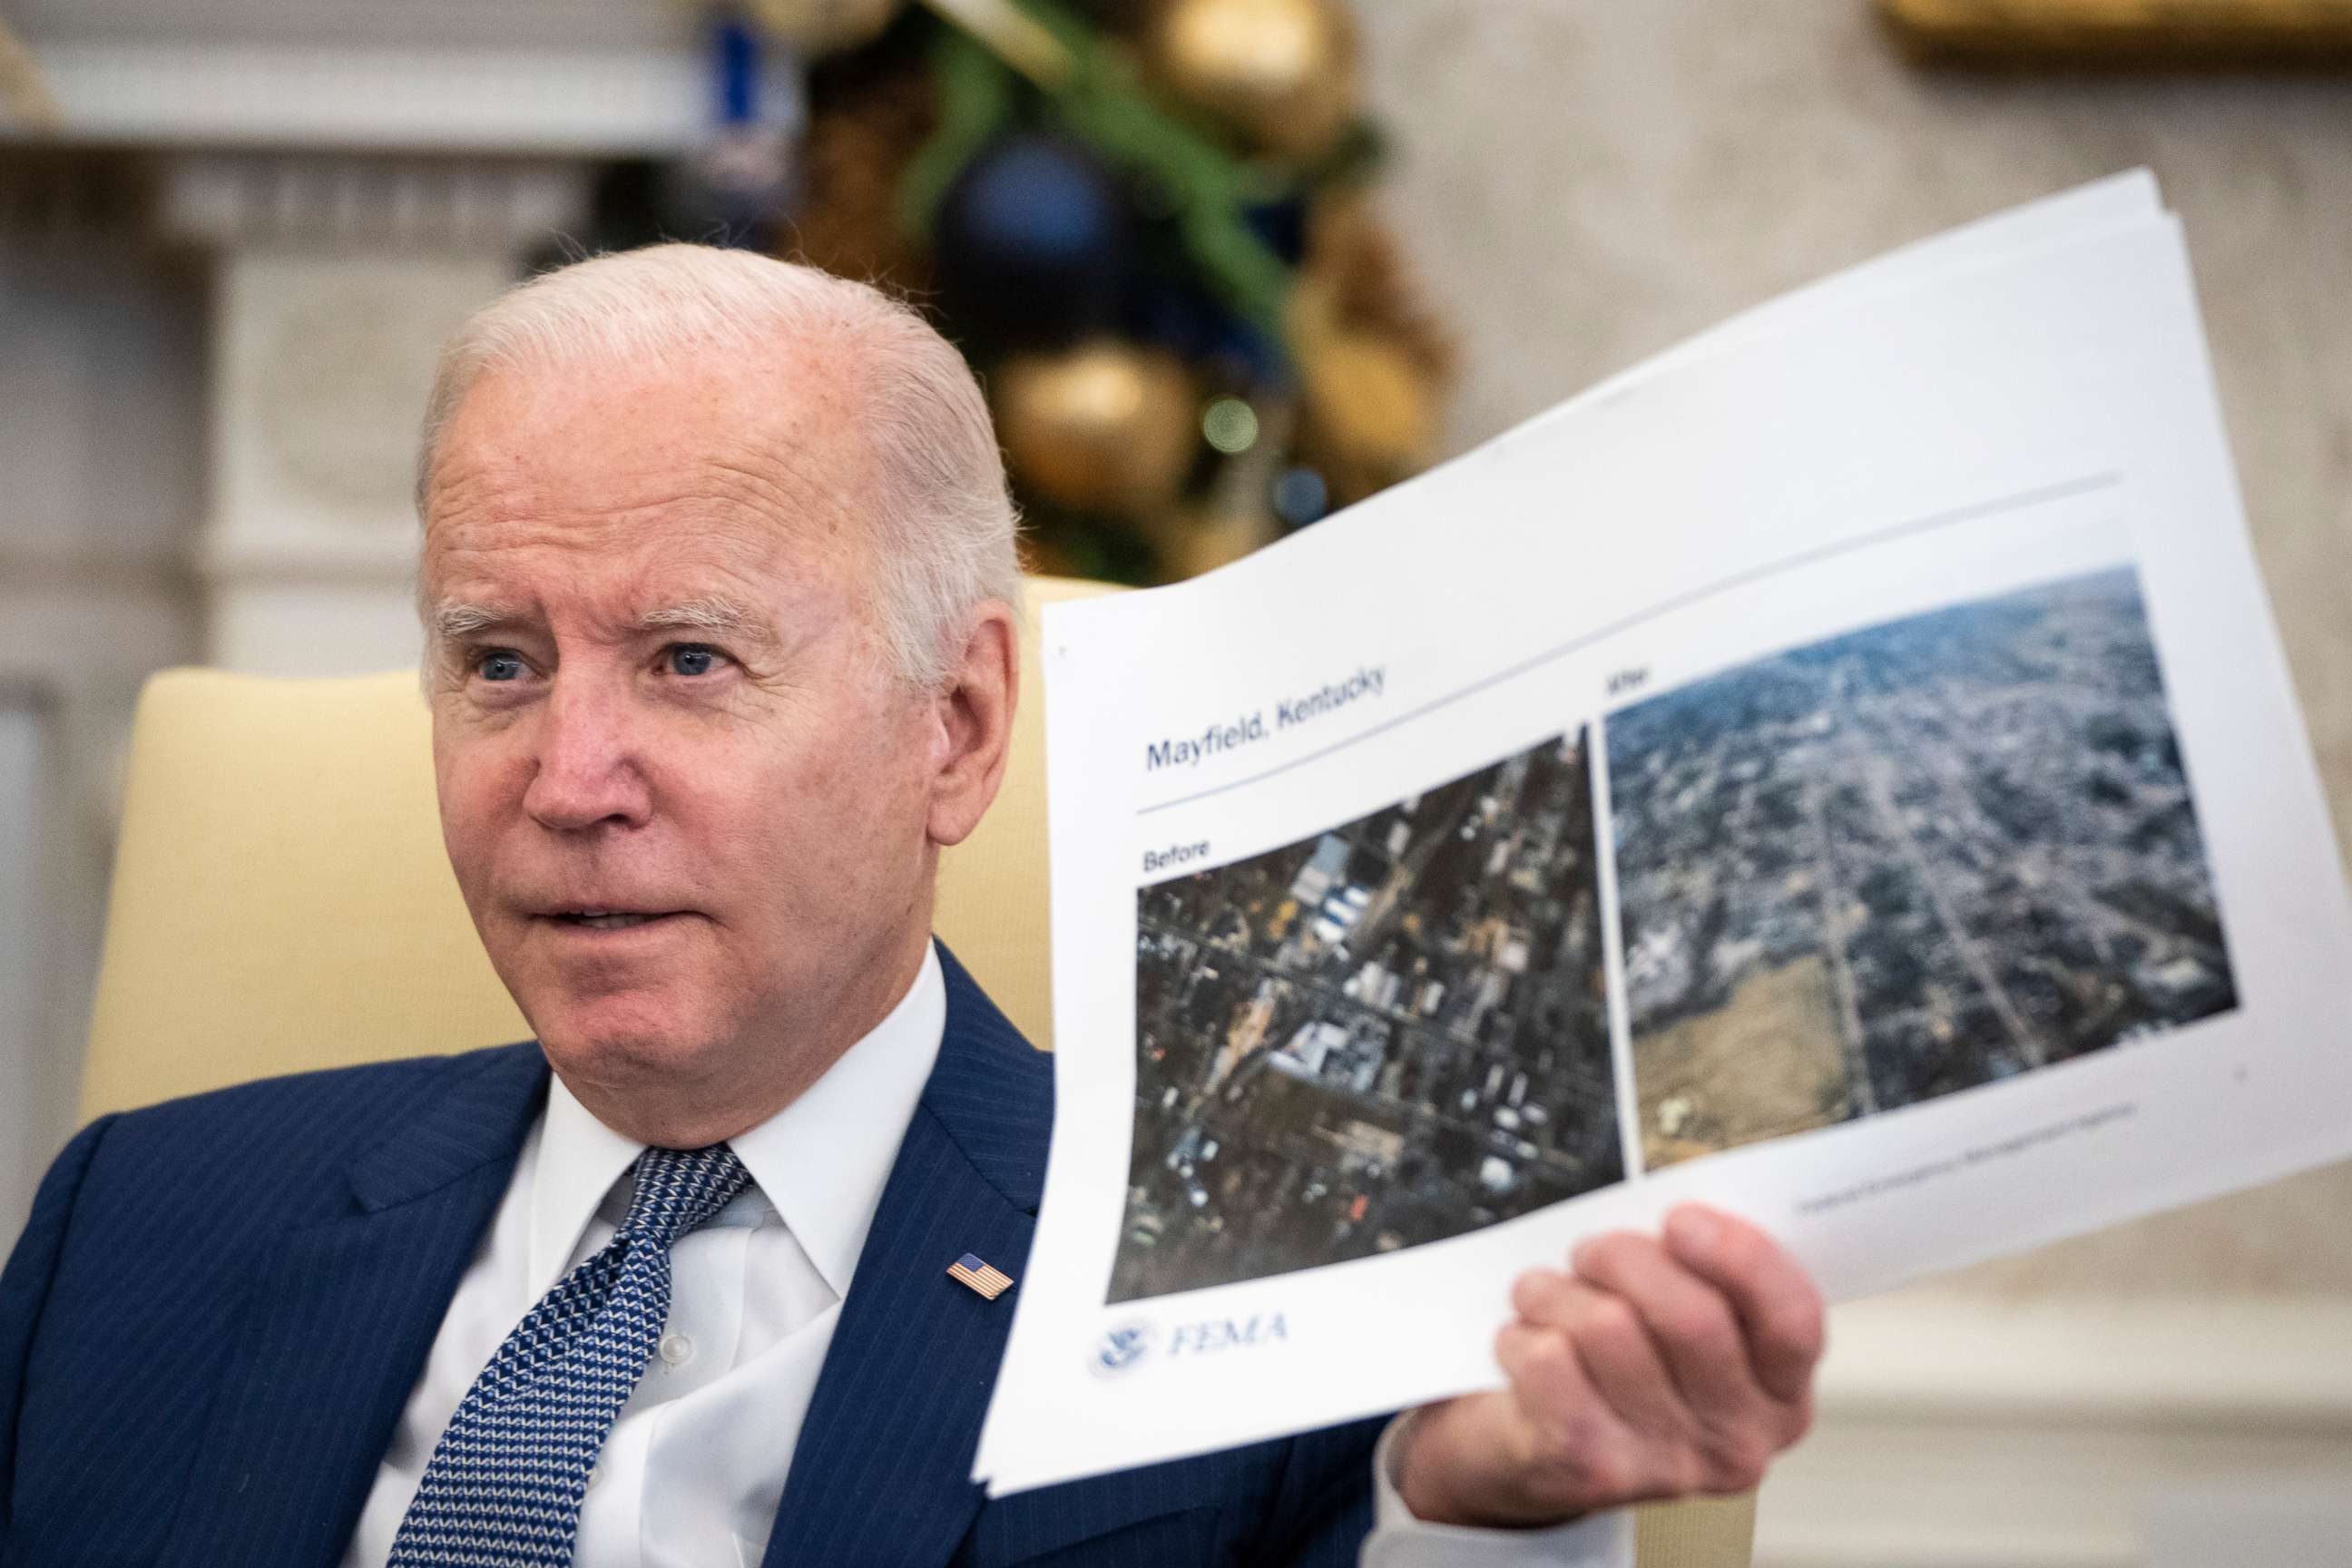 PHOTO: WASHINGTON, DC - DECEMBER 13: U.S. President Joe Biden speaks during a briefing about the recent tornadoes in the Midwest in the Oval Office of the White House December 13, 2021 in Washington, D.C. 